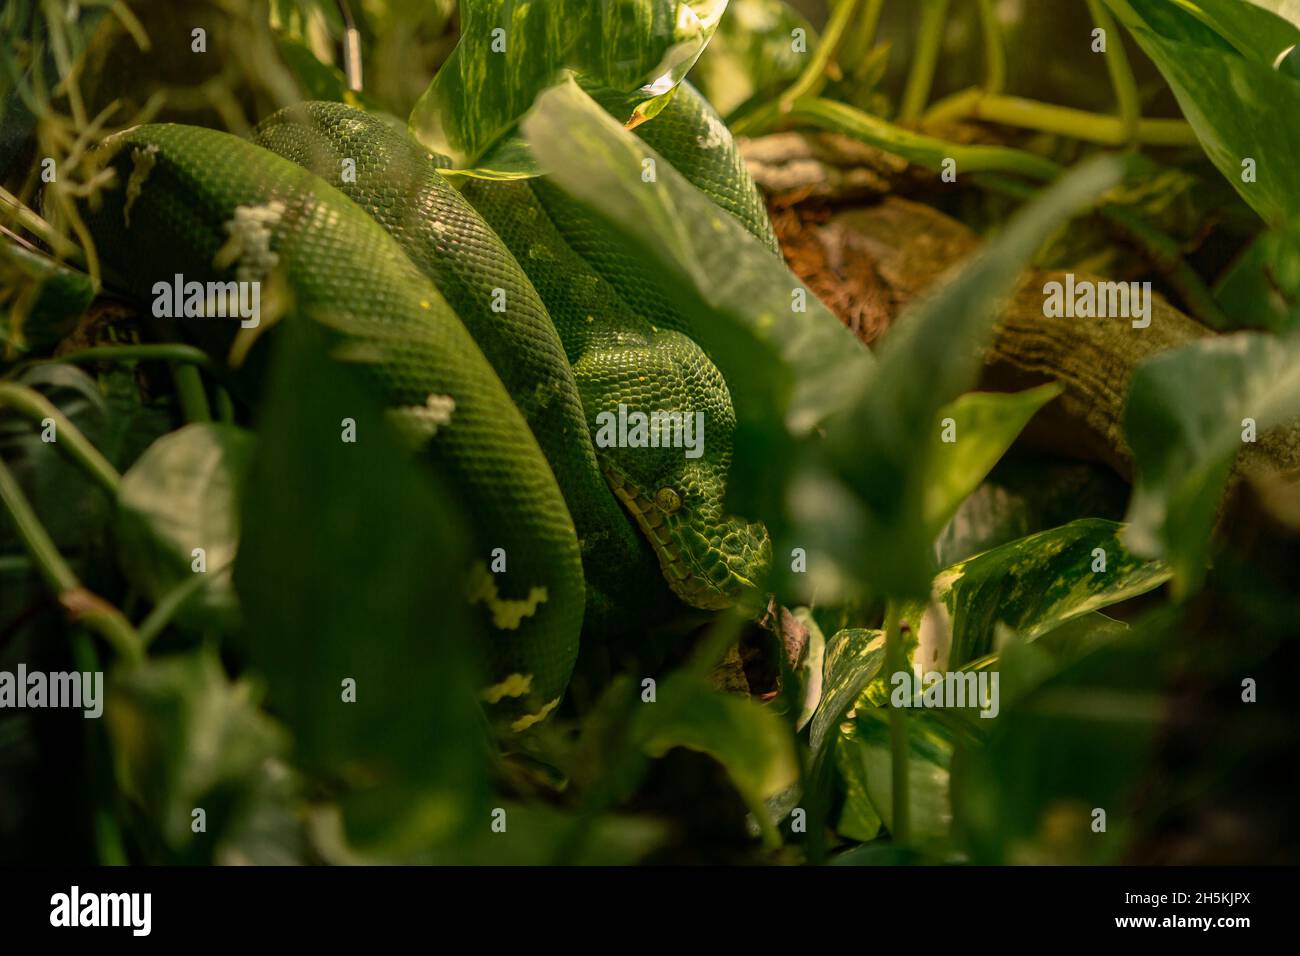 photo of emerald boa (Corallus caninus) coiled and camouflaged in vegetation Stock Photo